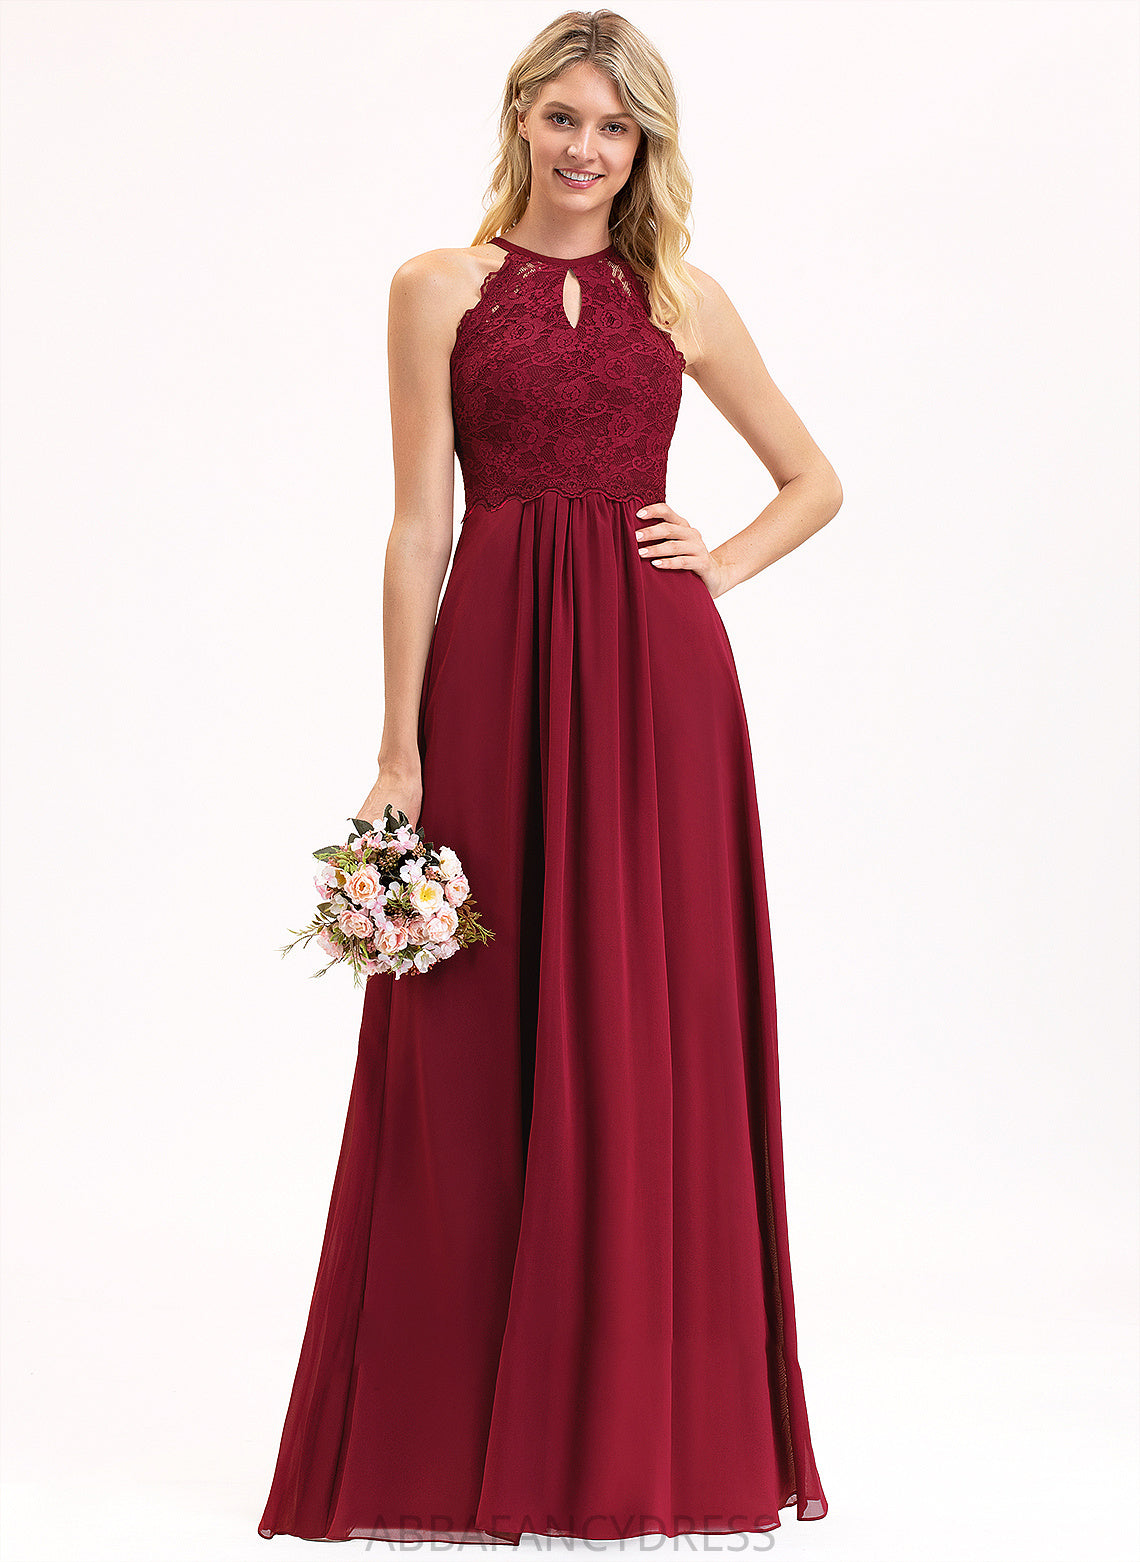 Silhouette Floor-Length Straps Fabric Lace Length A-Line Neckline ScoopNeck Brynlee Sleeveless Spaghetti Staps